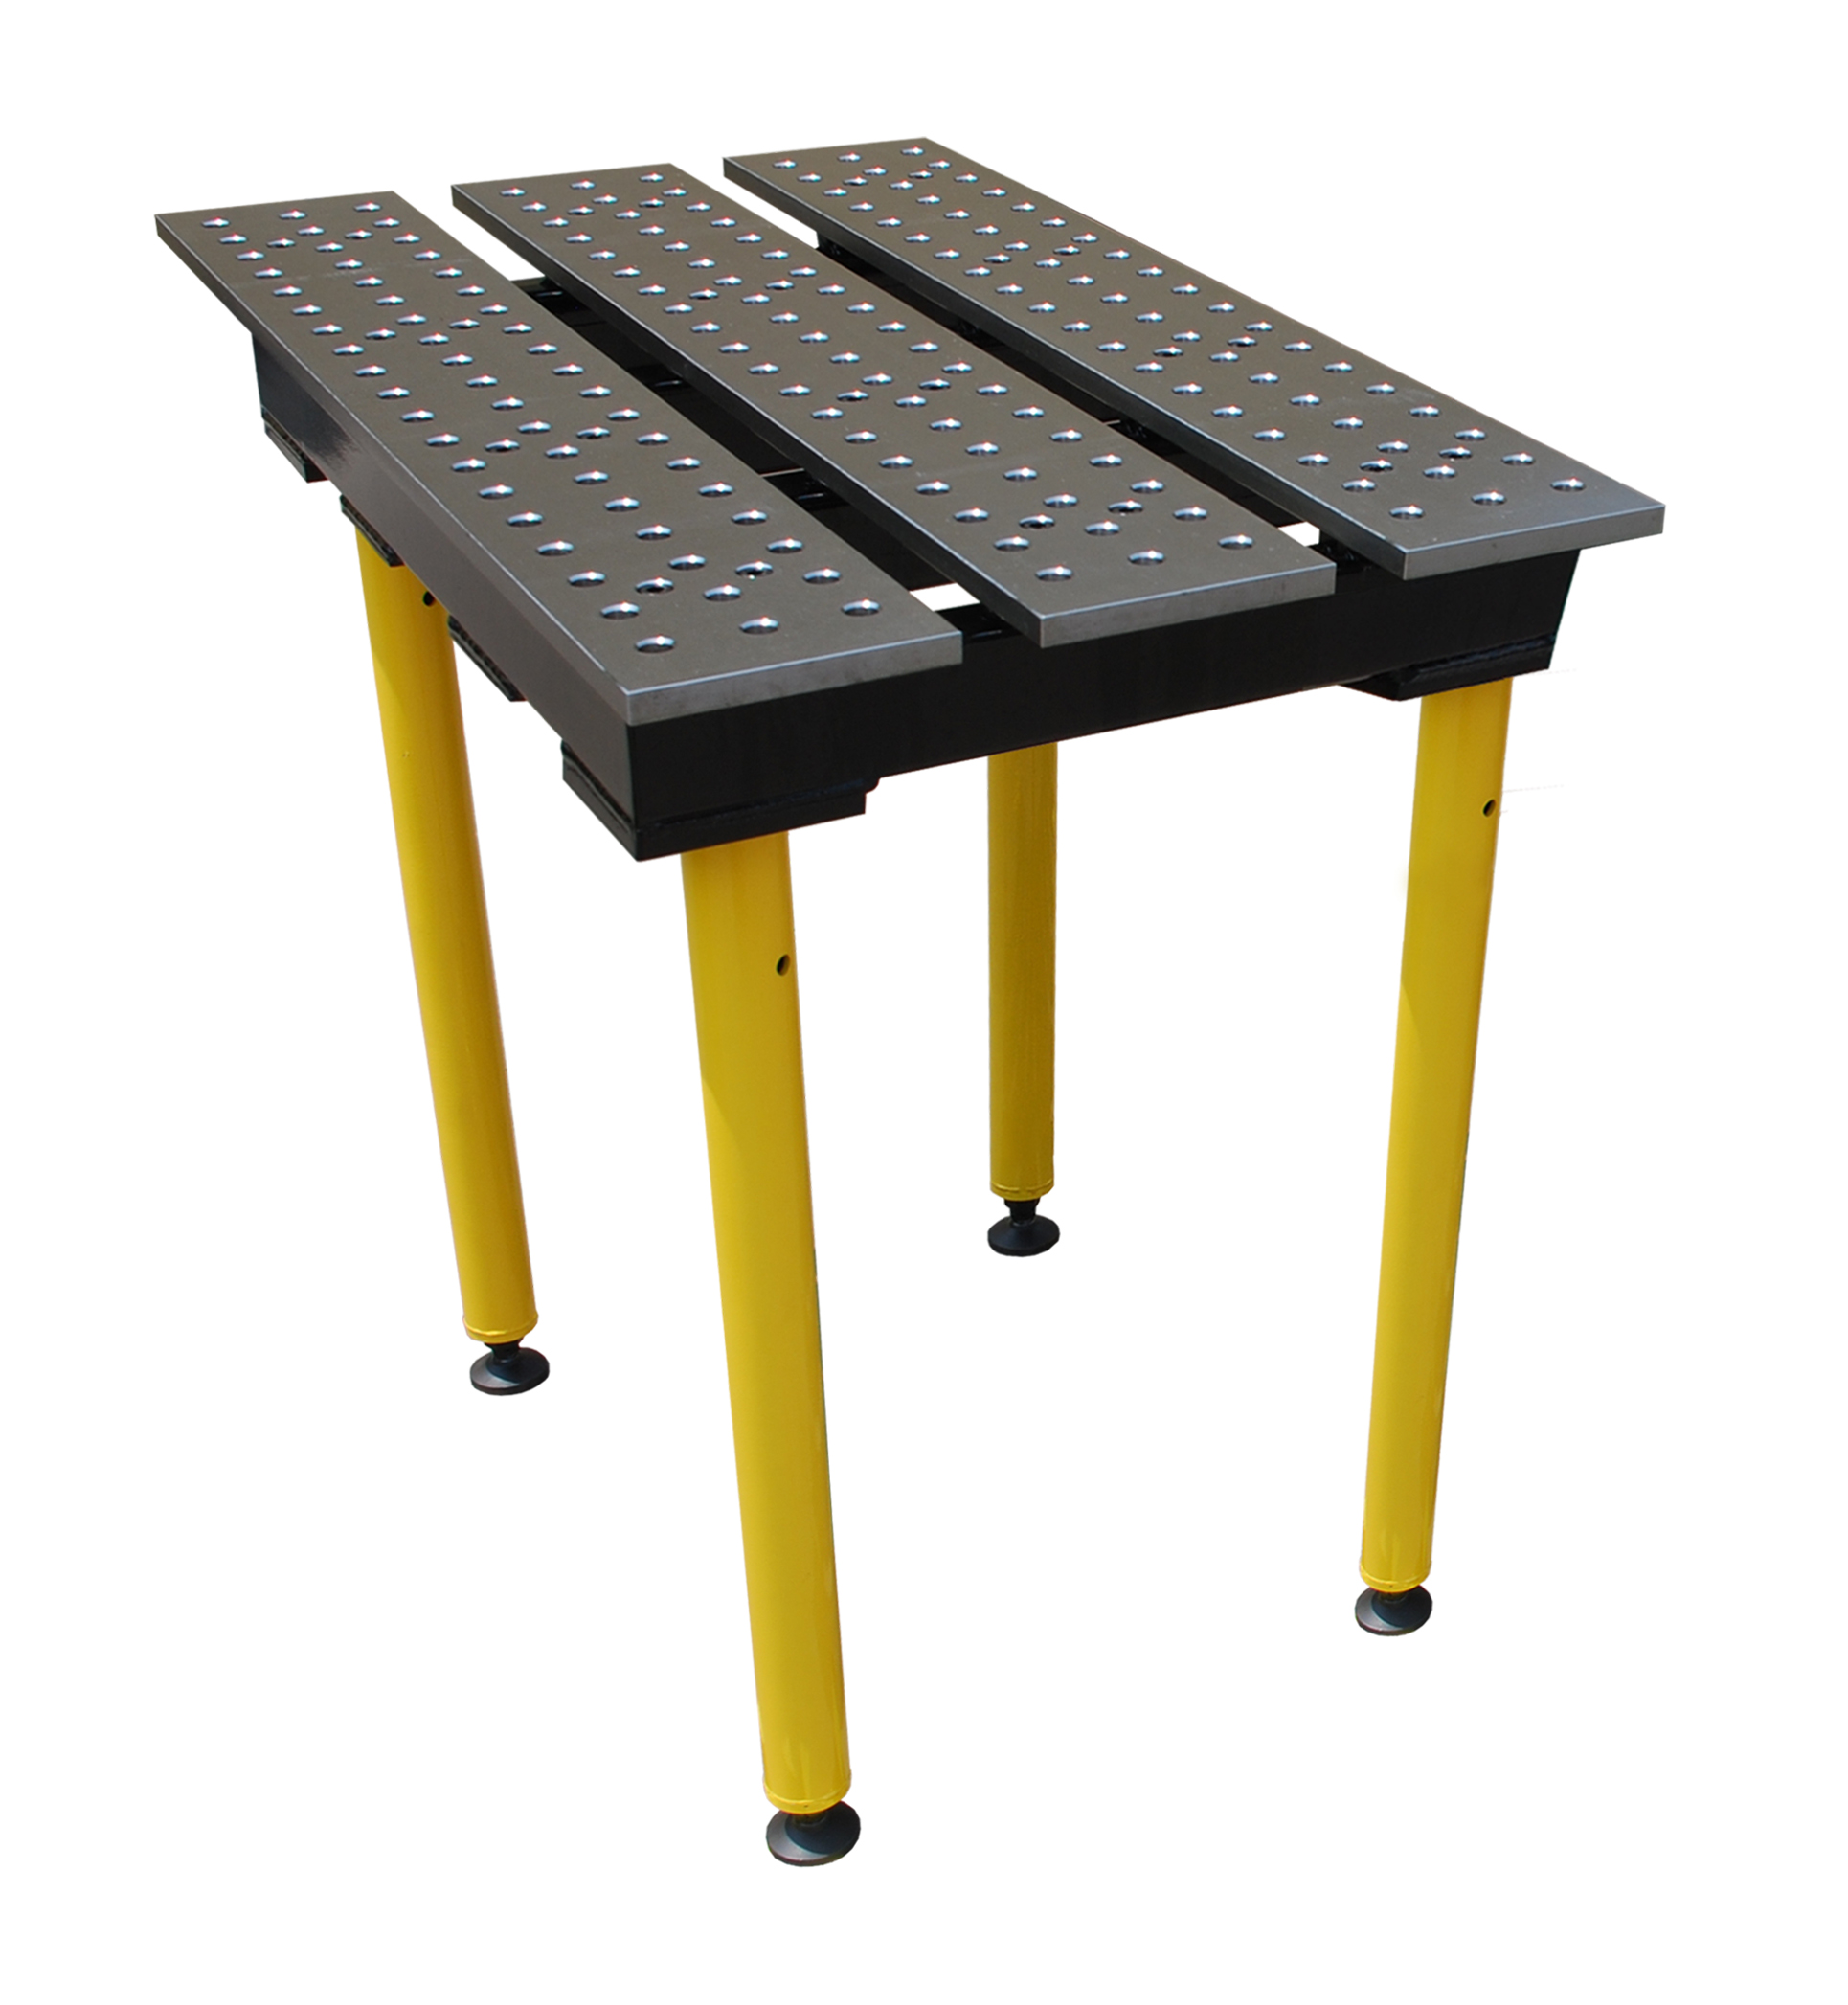 table fente 560-1000 pied standard buildpro